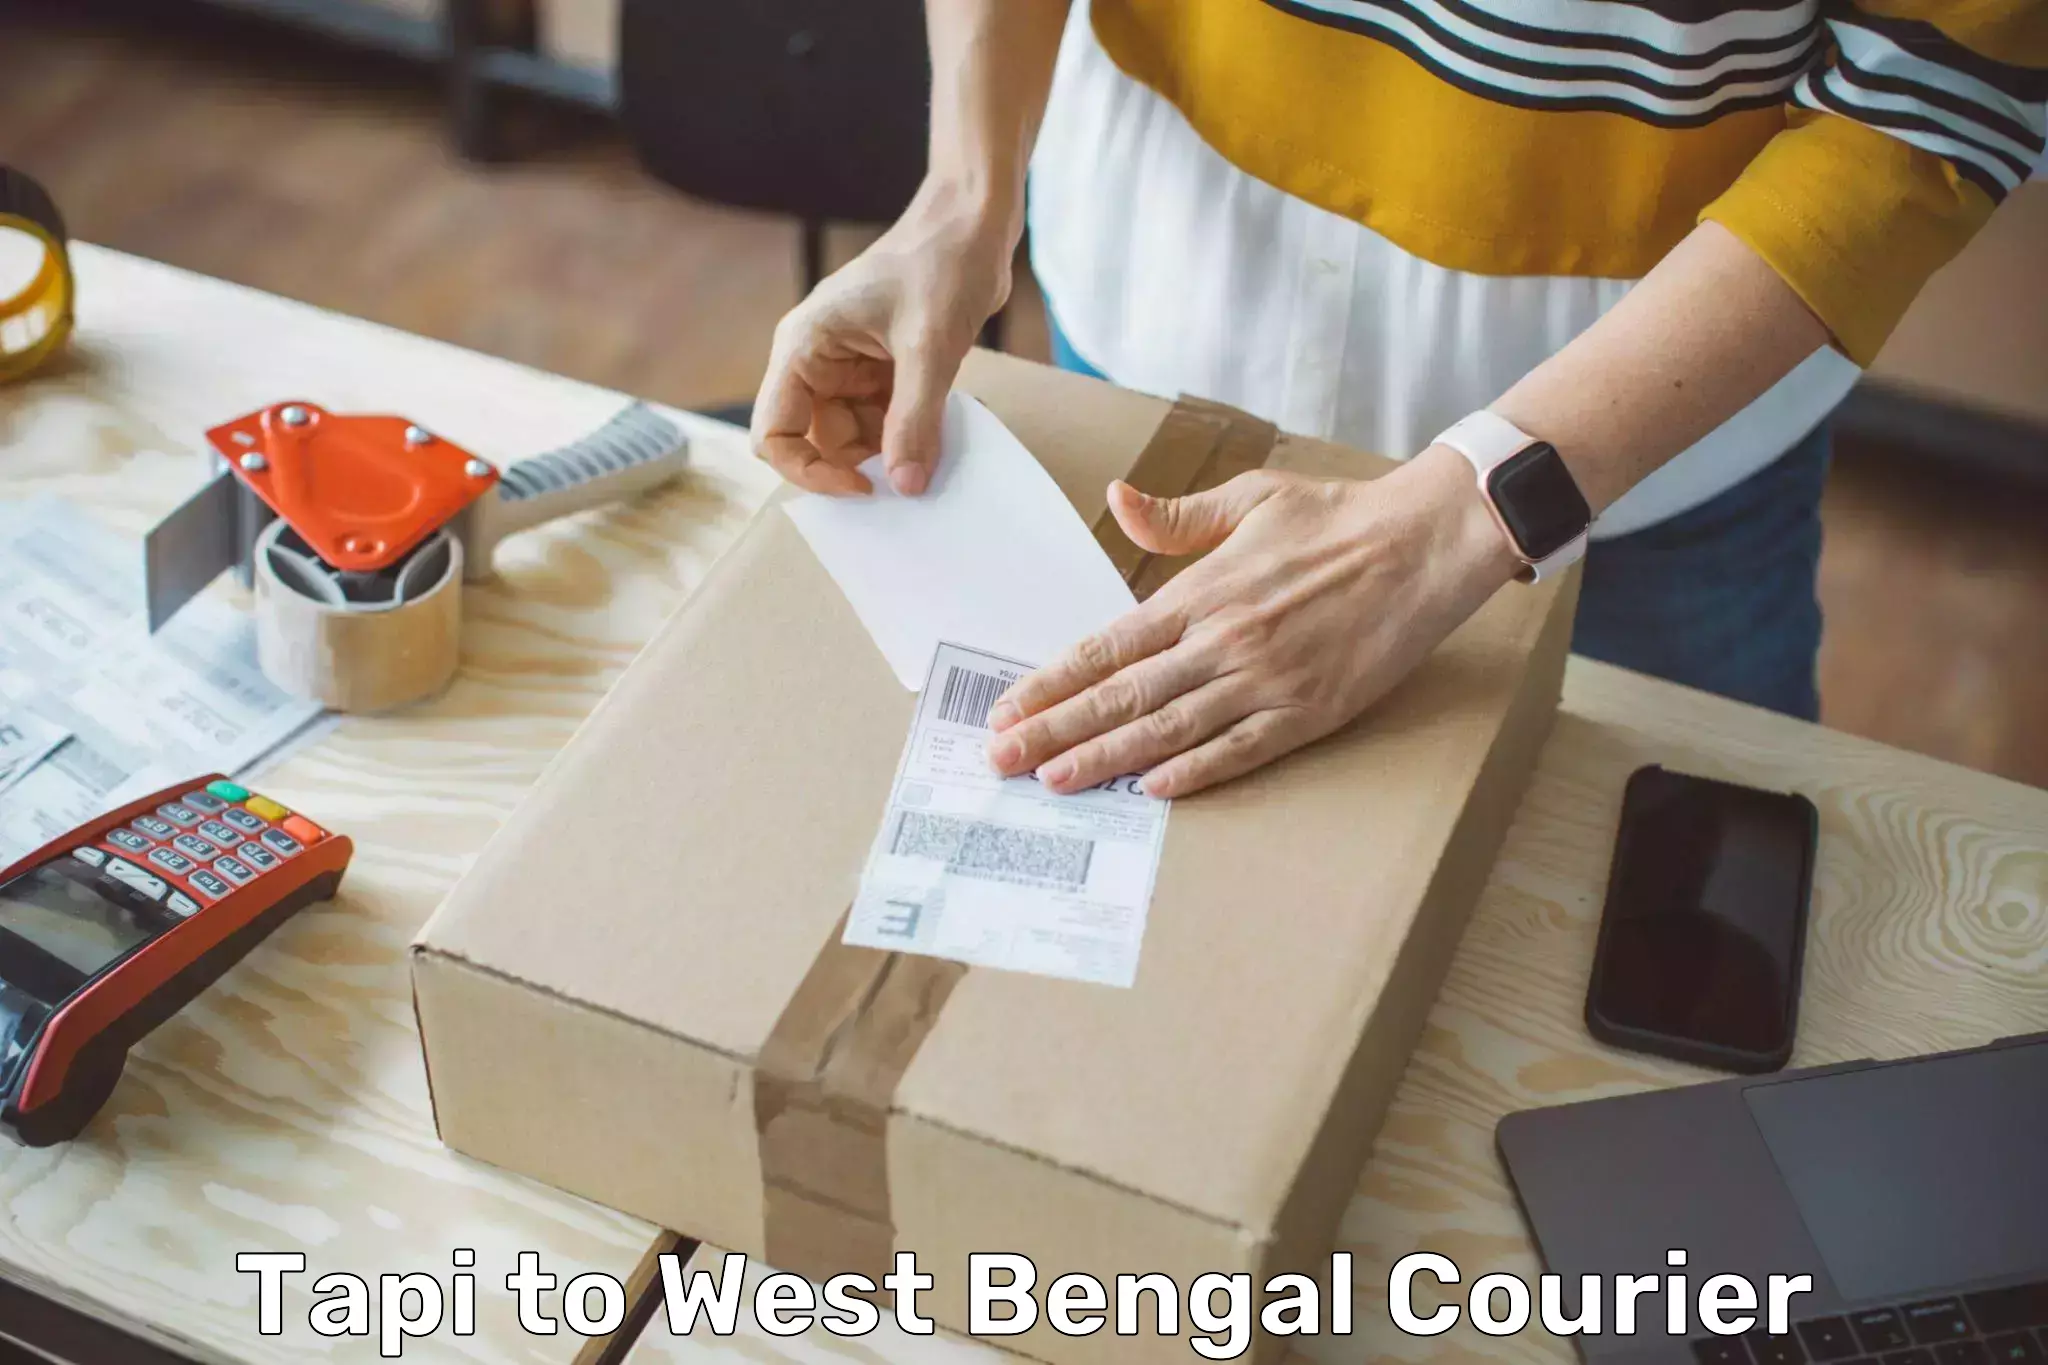 Delivery service partnership Tapi to West Bengal